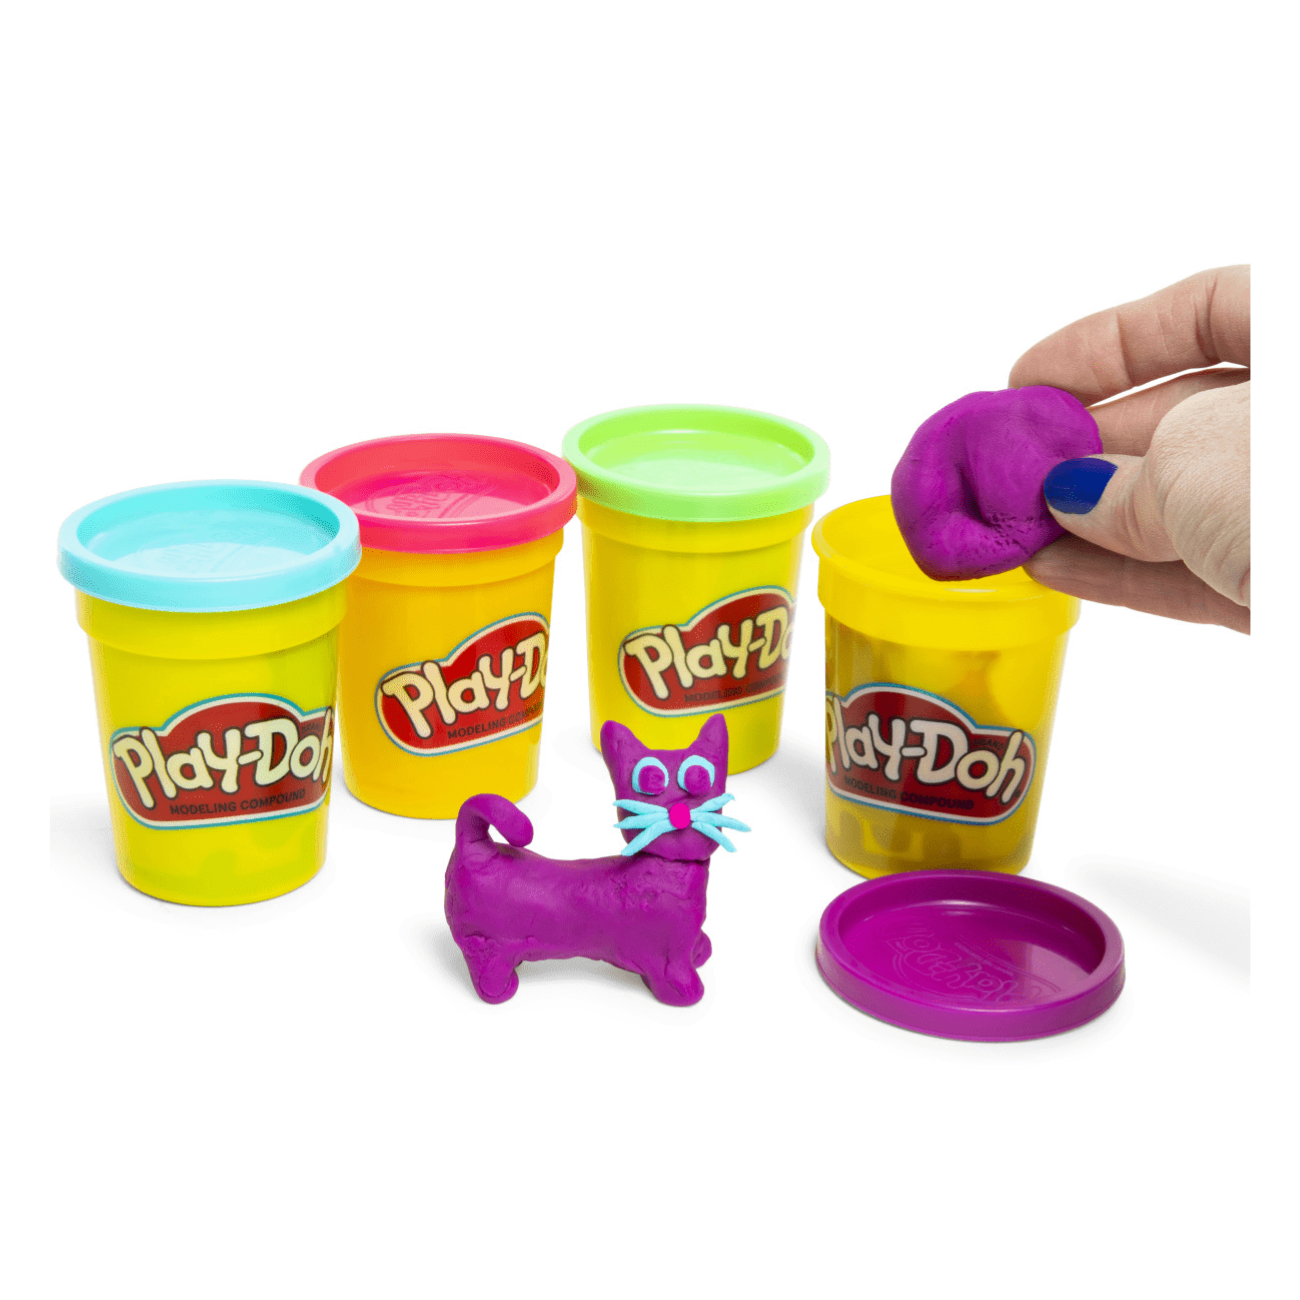 Play Doh Assorted 4 Pack